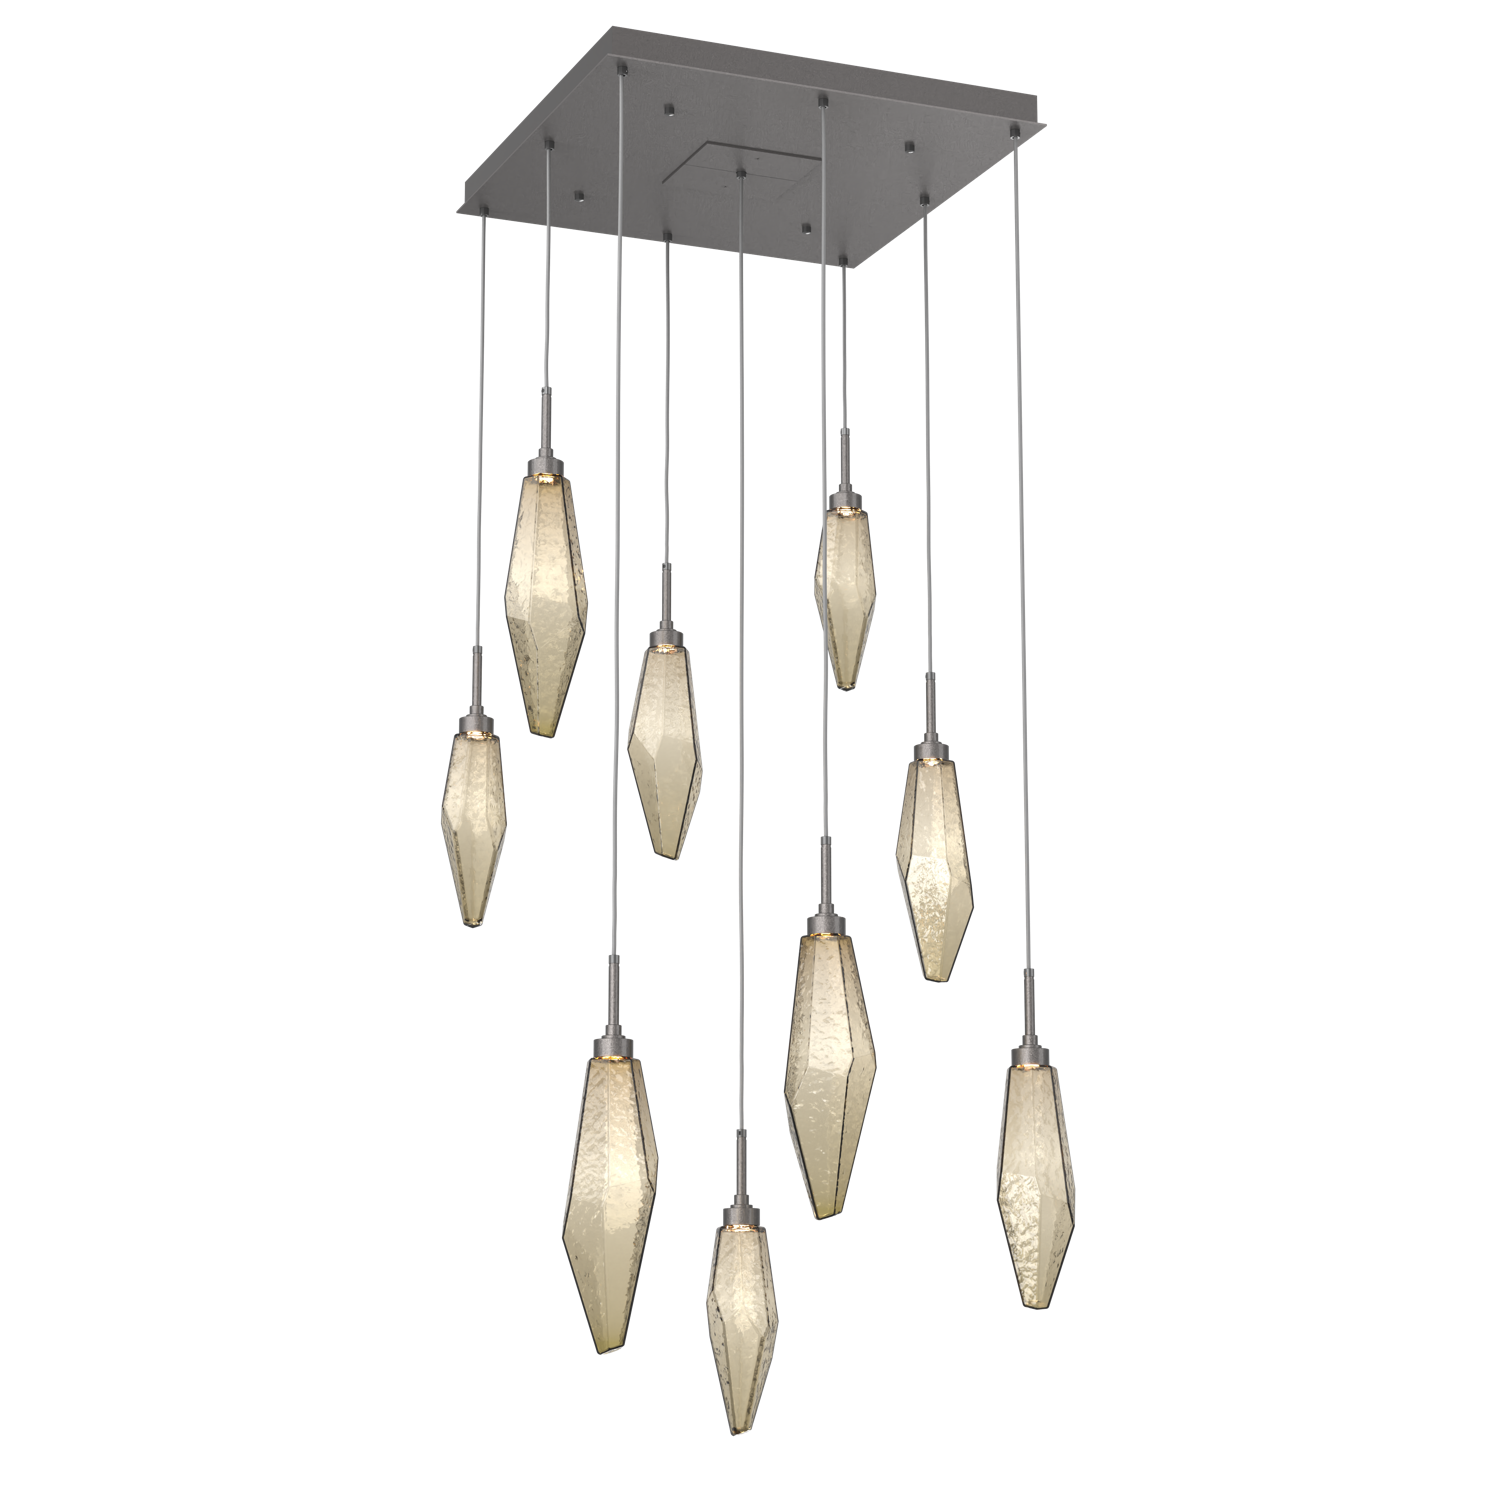 CHB0050-09-GP-CB-Hammerton-Studio-Rock-Crystal-9-light-square-pendant-chandelier-with-graphite-finish-and-chilled-bronze-blown-glass-shades-and-LED-lamping